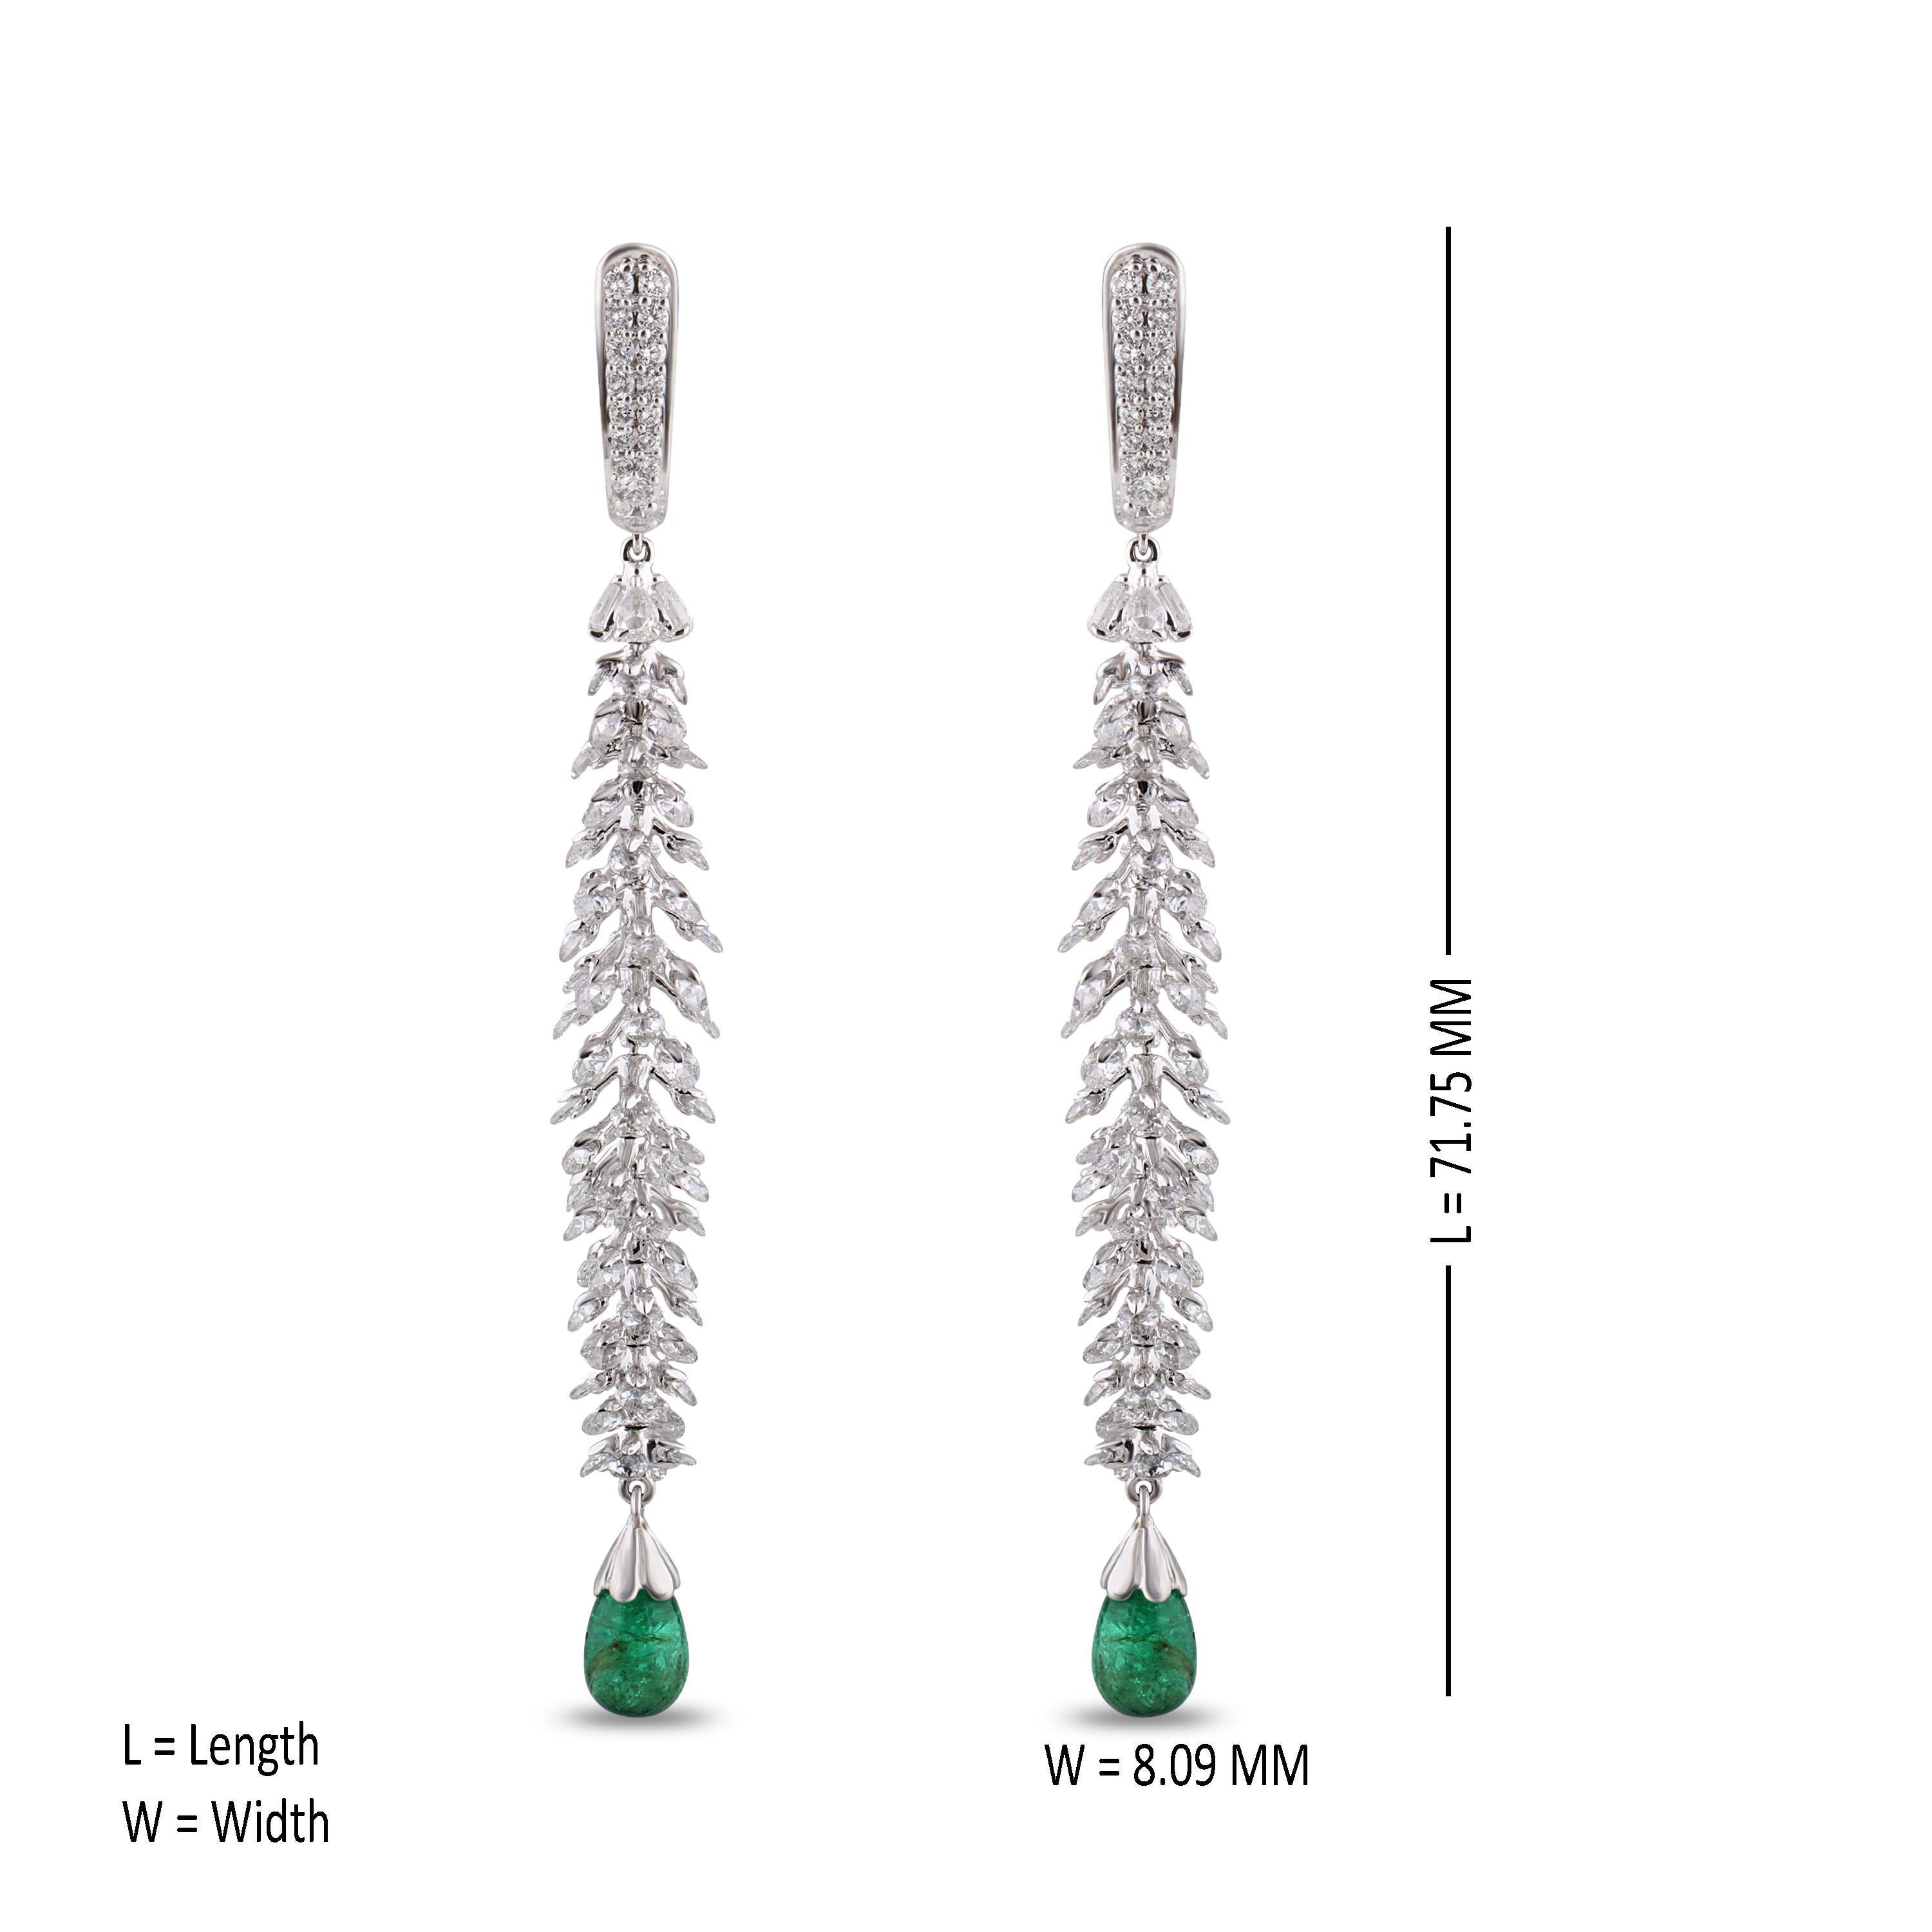 Contemporary Studio Rêves Rose Cut Dangling Earrings with Emeralds in 18 Karat Gold For Sale